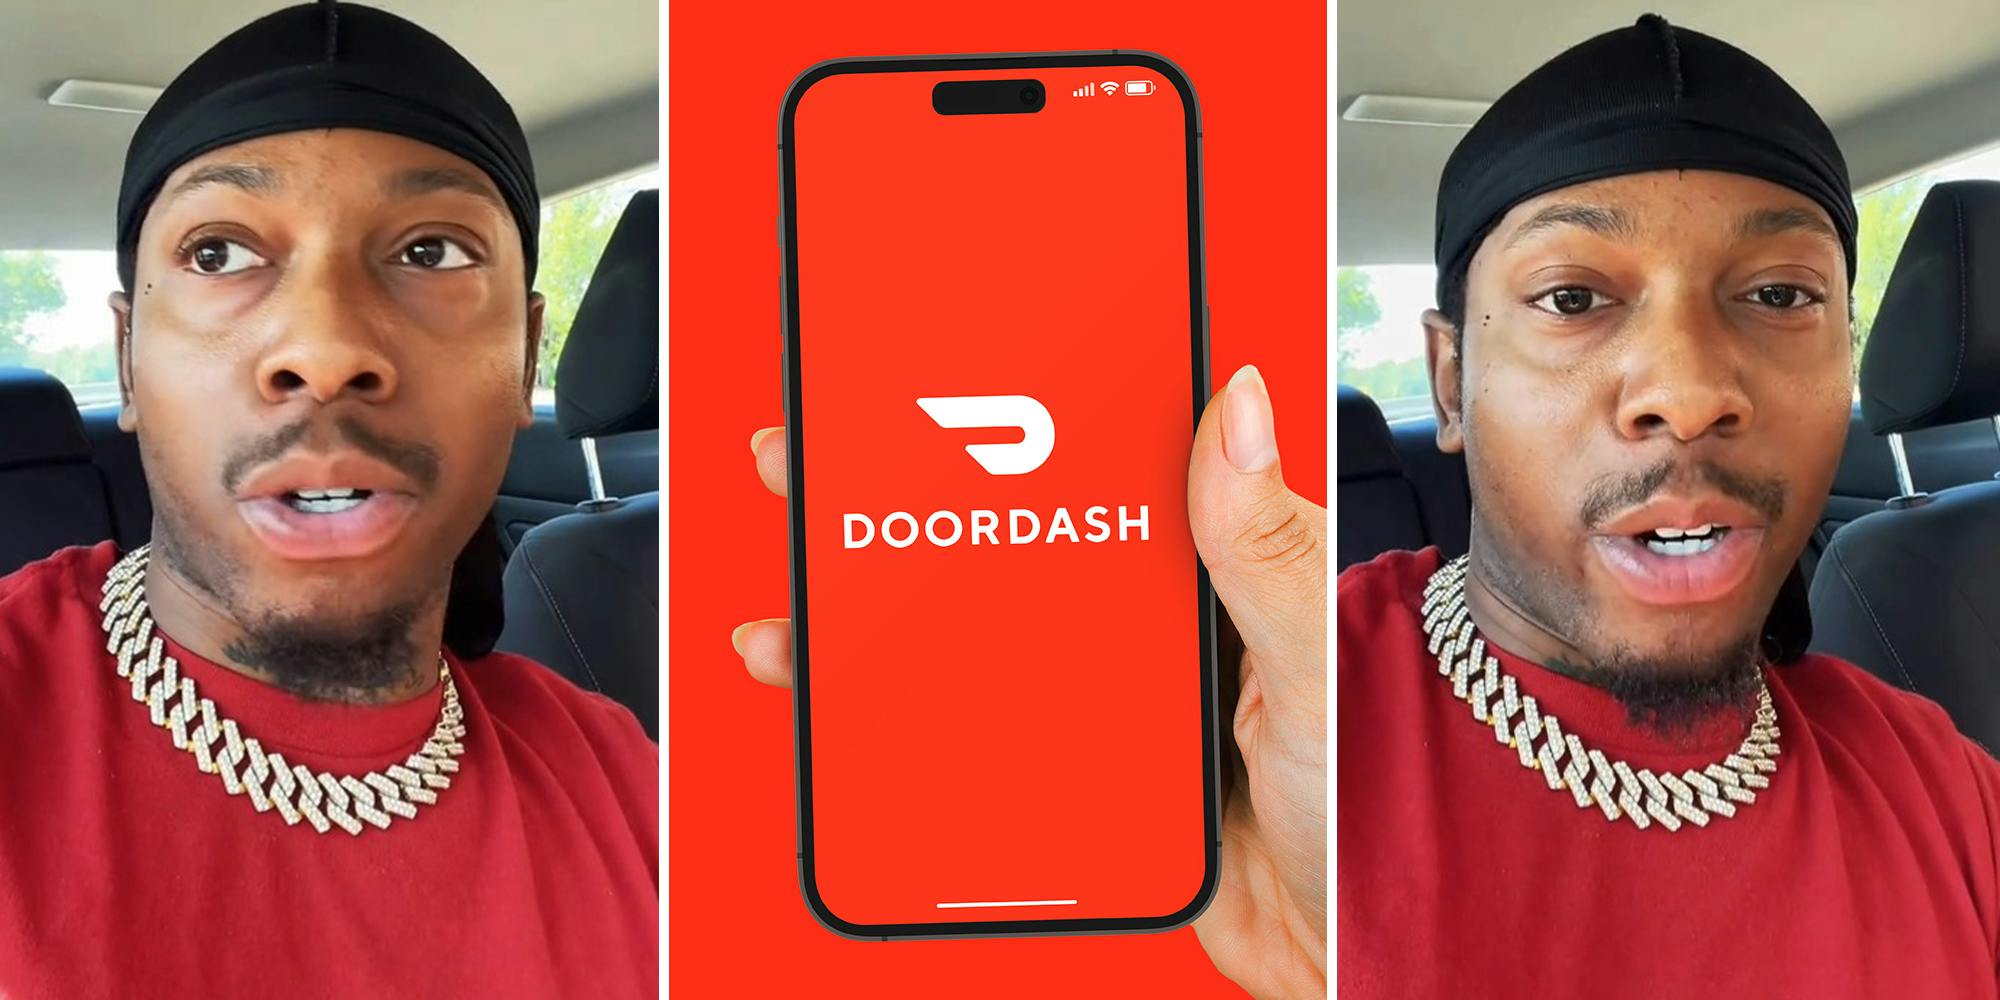 DoorDash driver says someone placed an order for a single pack of sauce from Taco Bell